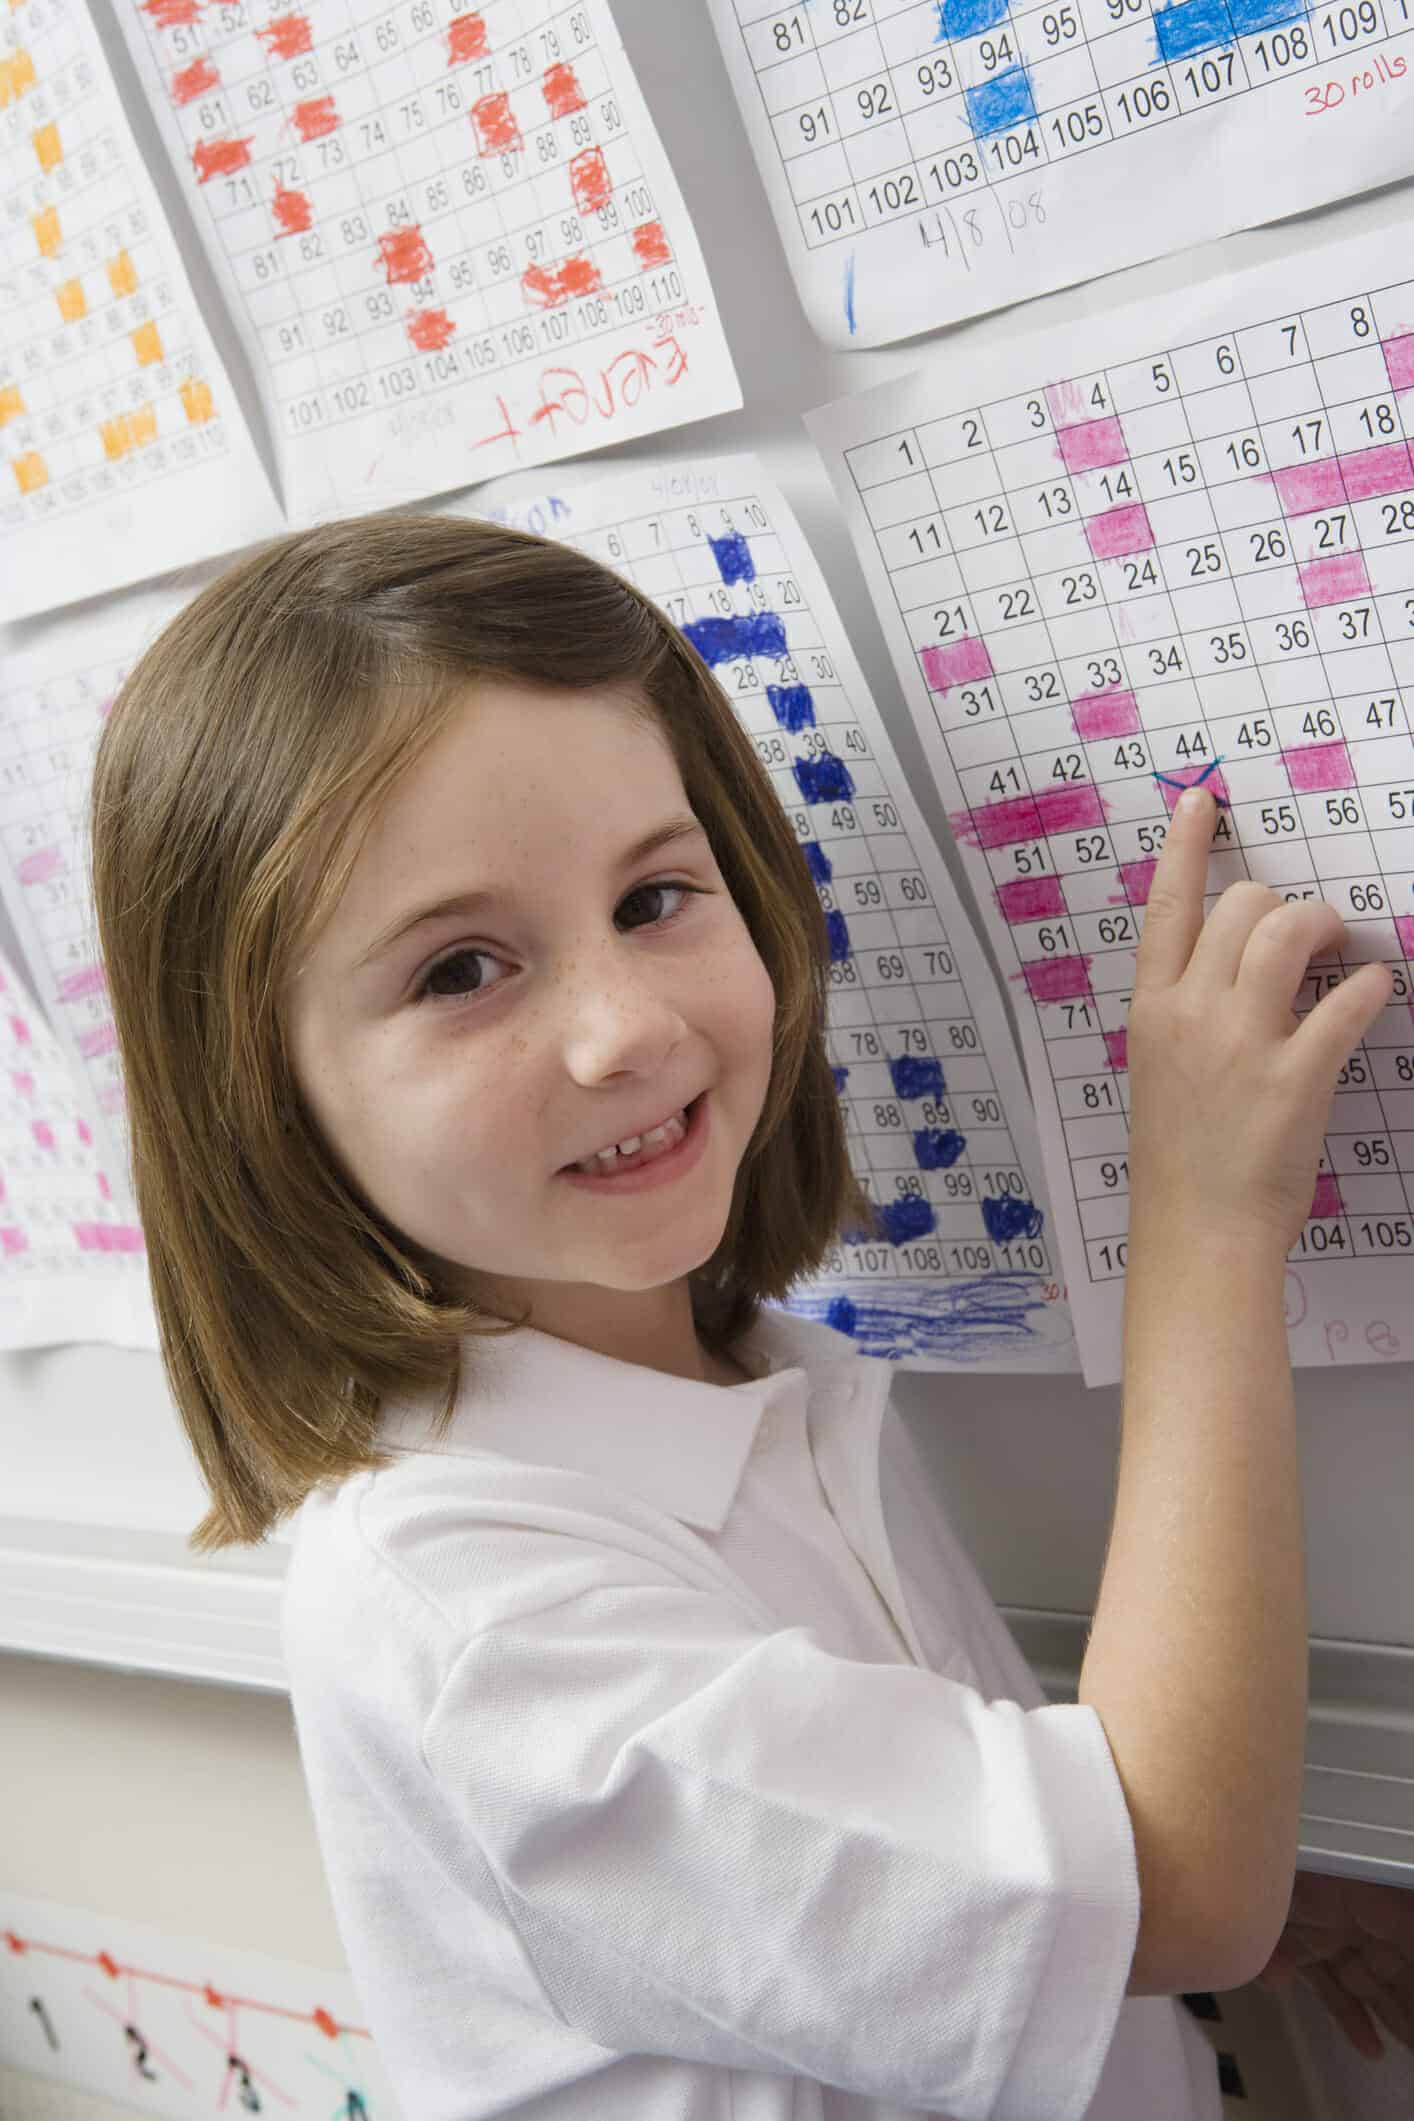 Smiling young girl pointing to a colored calendar page on the wall.